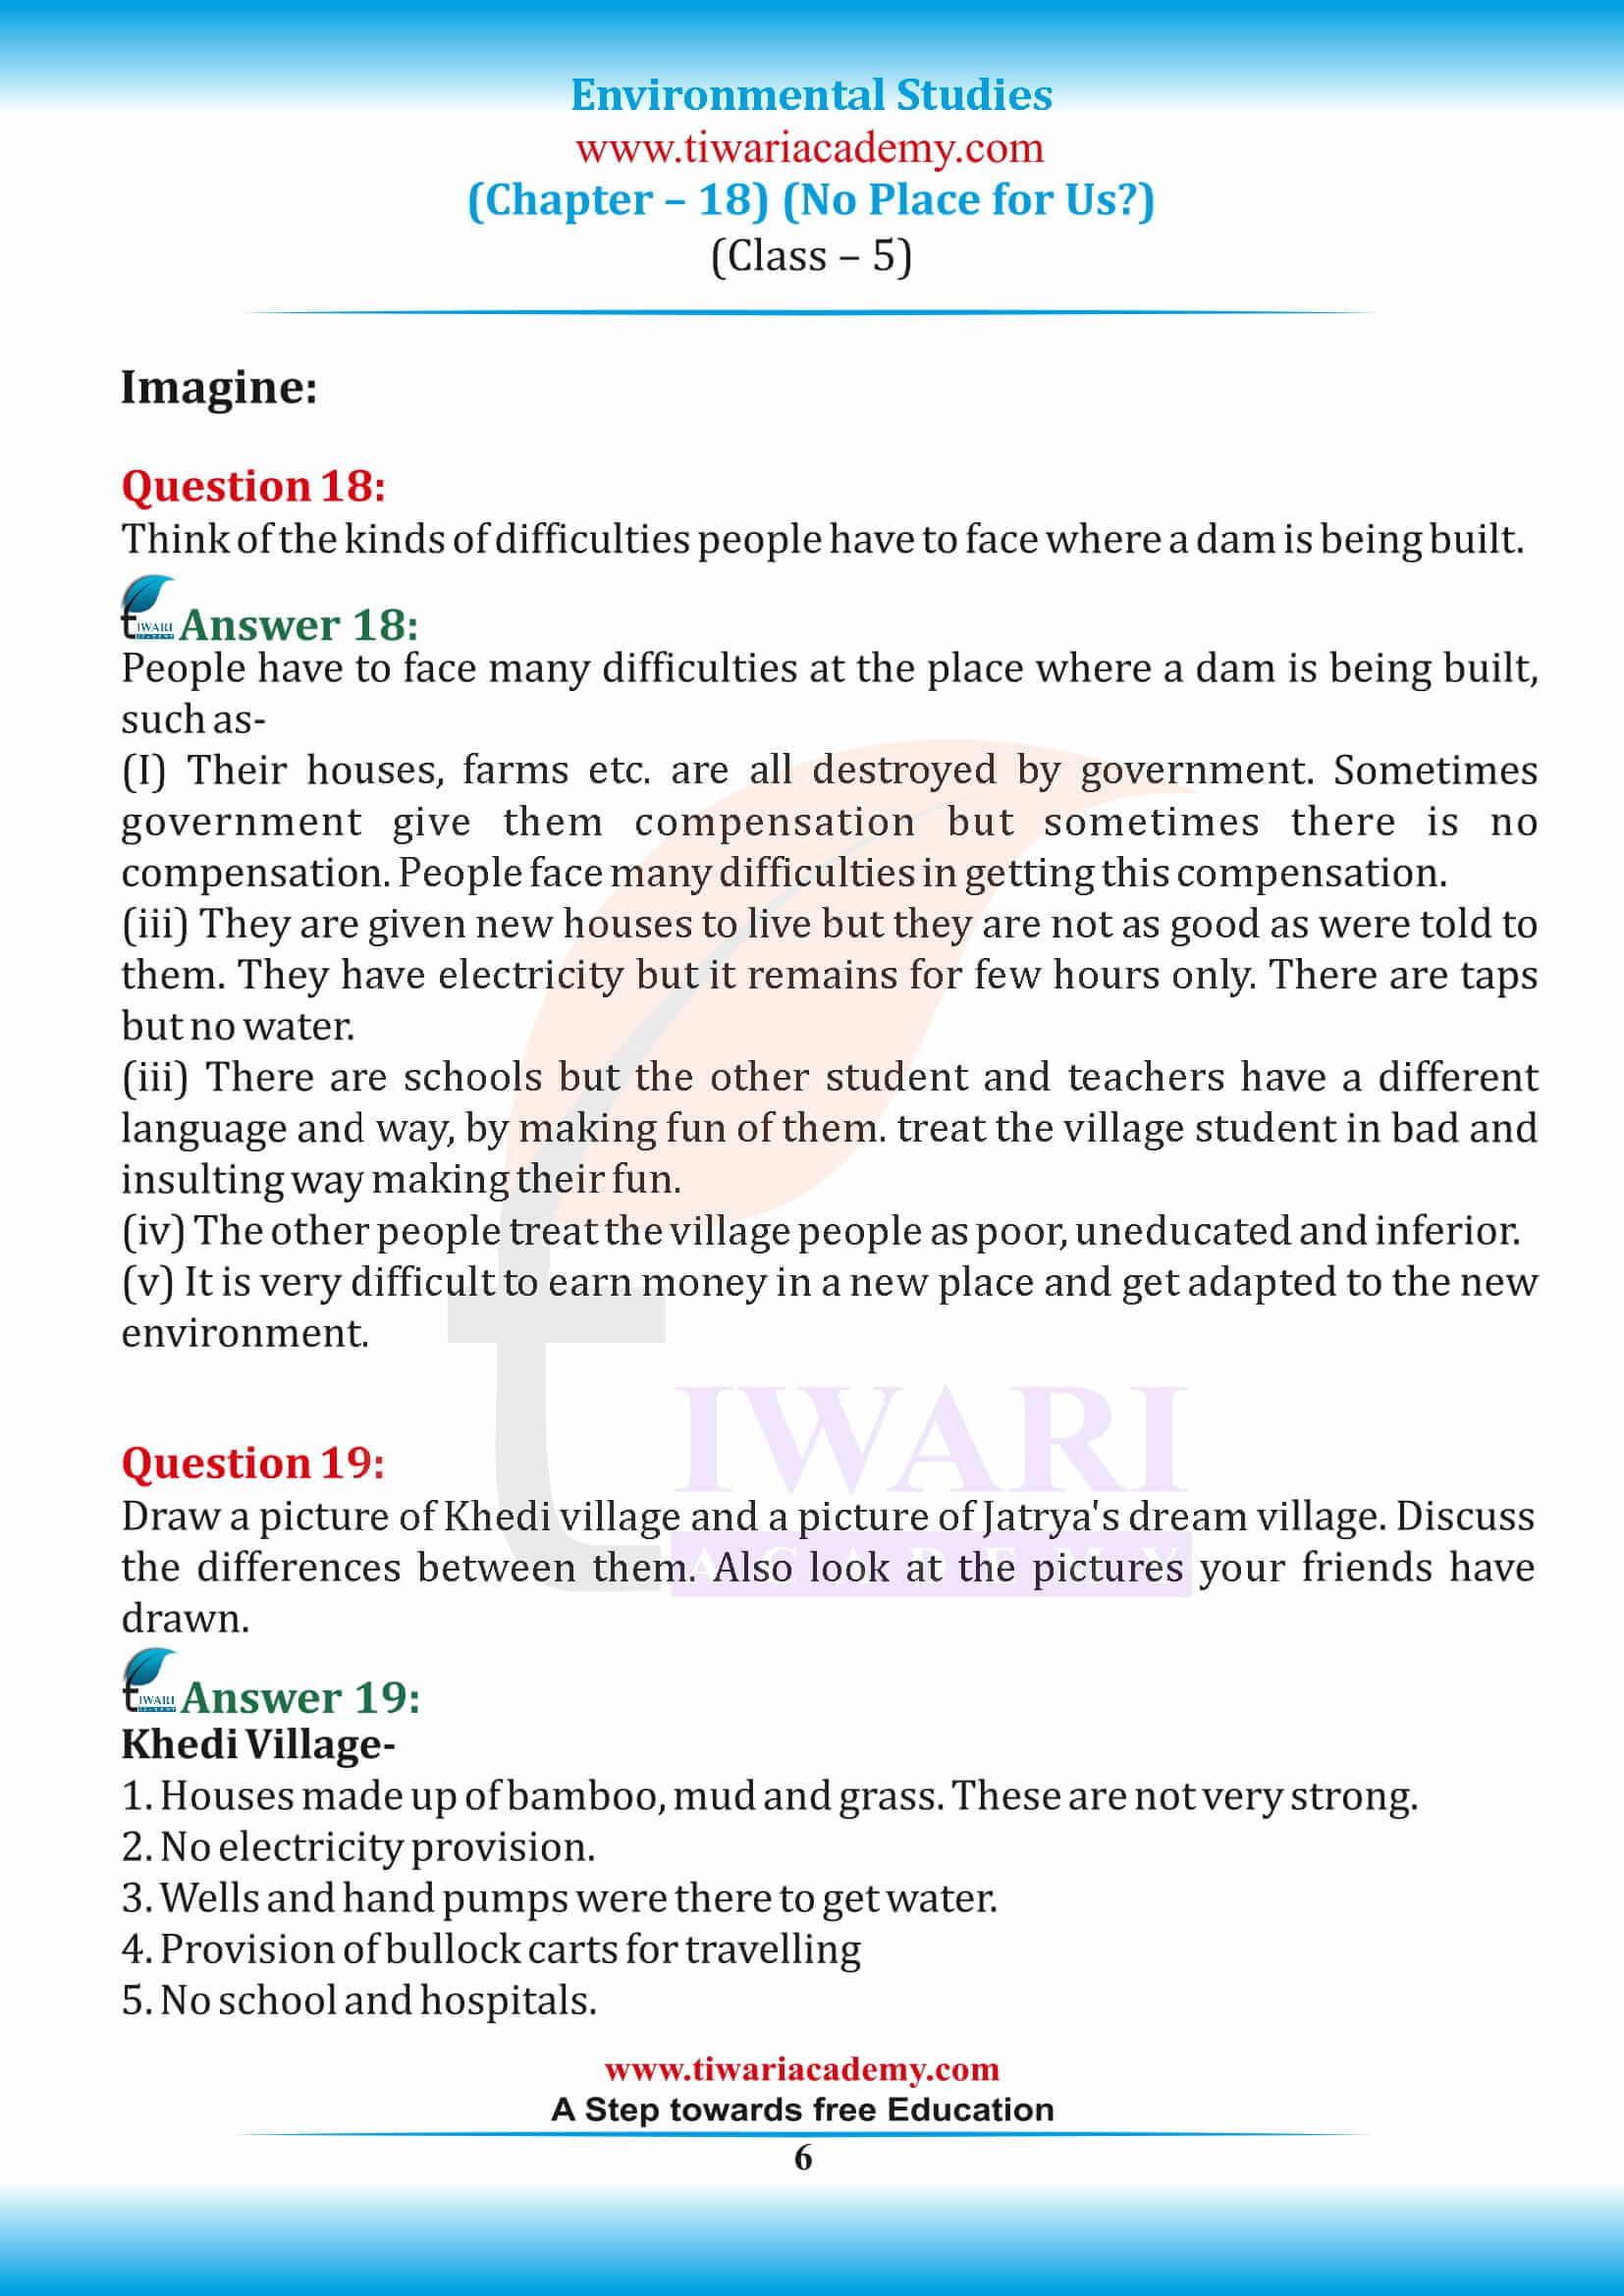 NCERT Solutions for Class 5 EVS Chapter 18 all answers